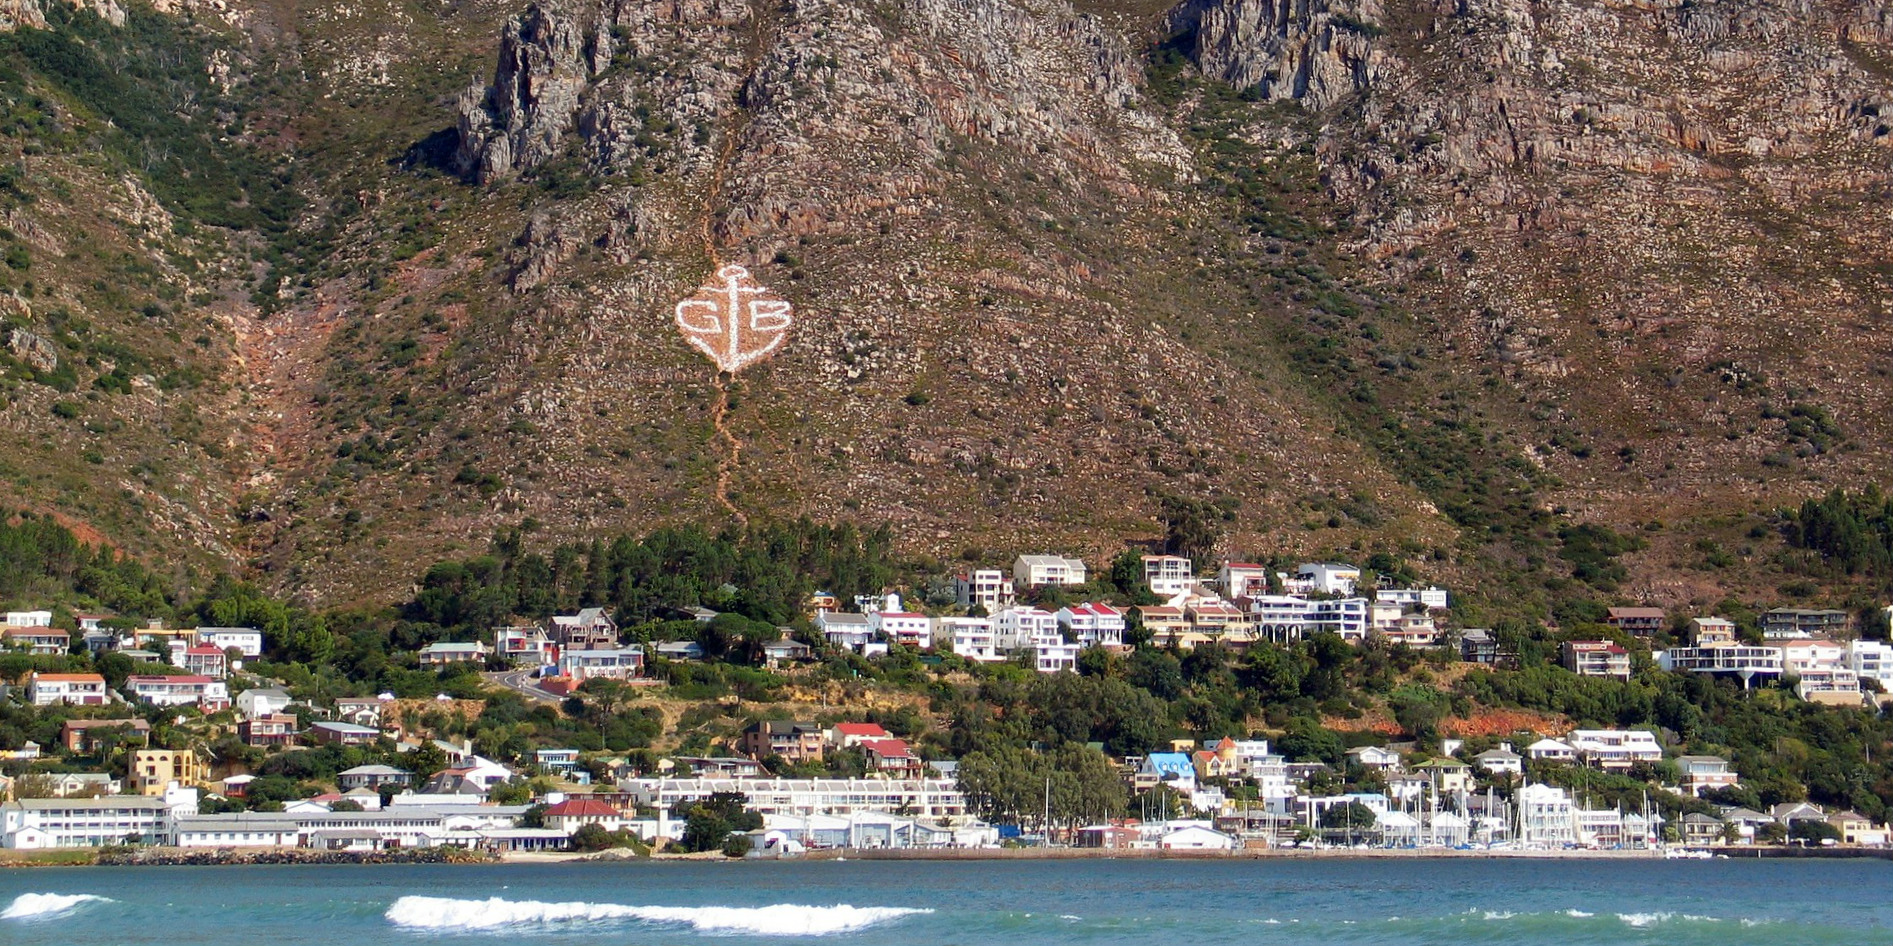 While volunteering in cape town, participants will be based in the seaside town of gordan's bay.